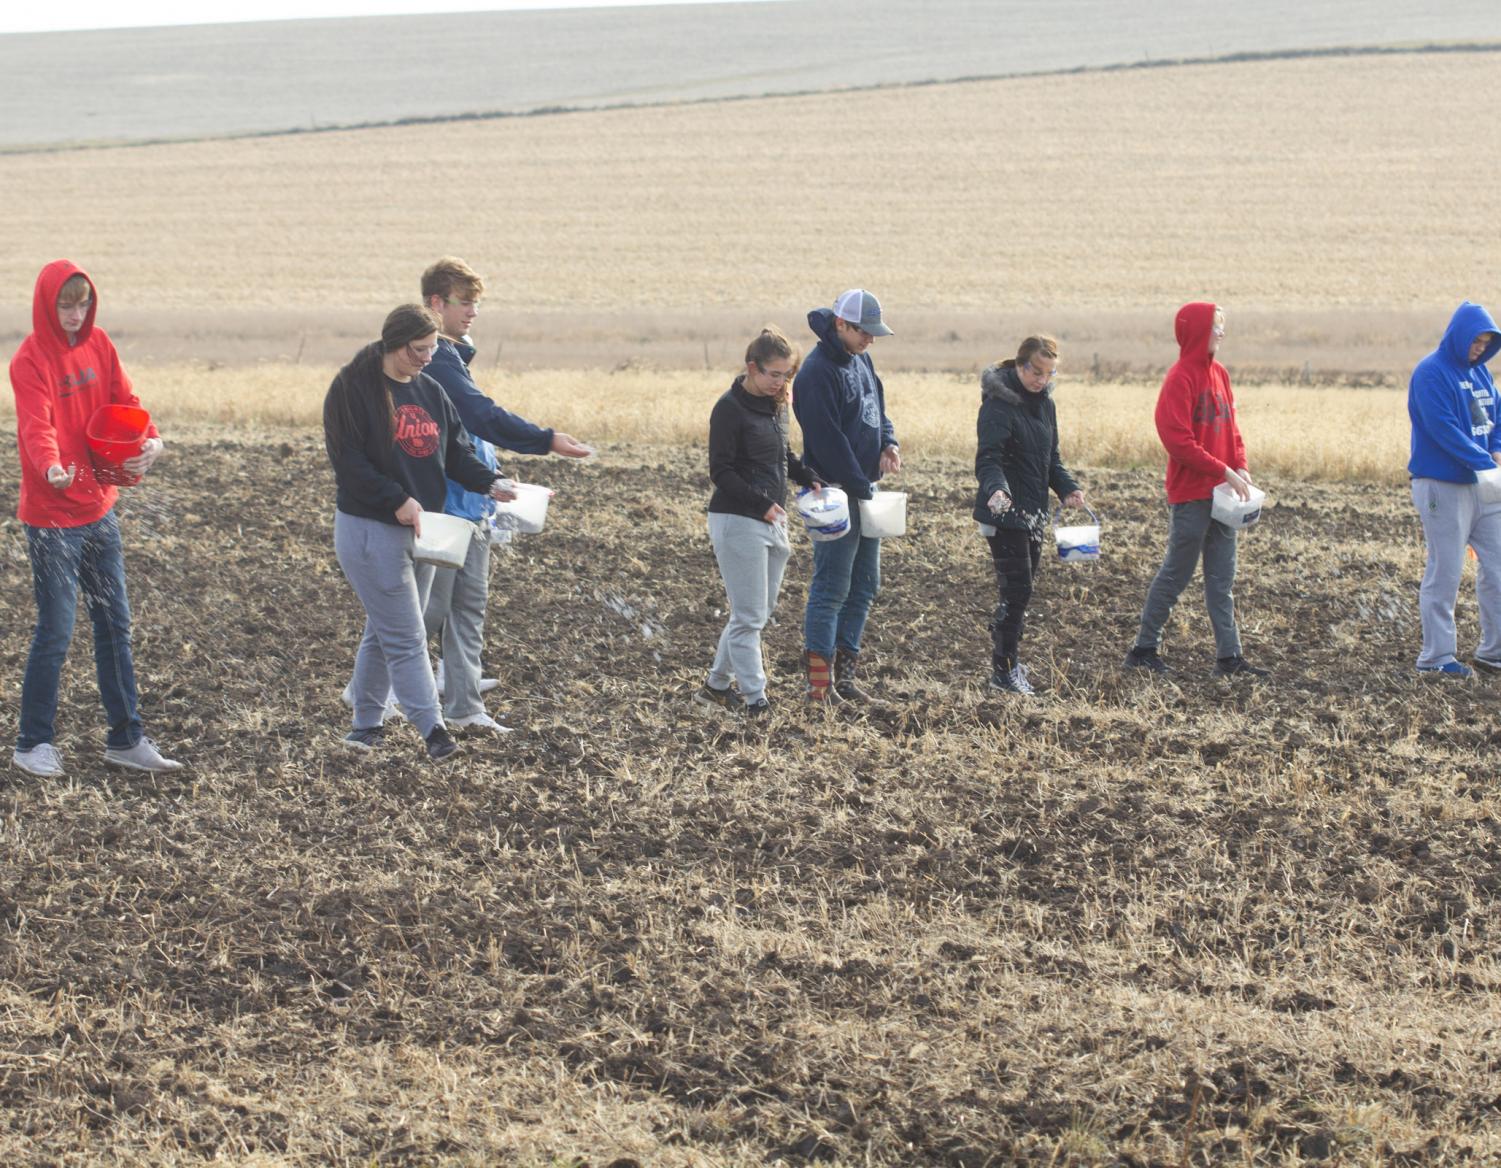 Students+lend+hand+in+prairie+project